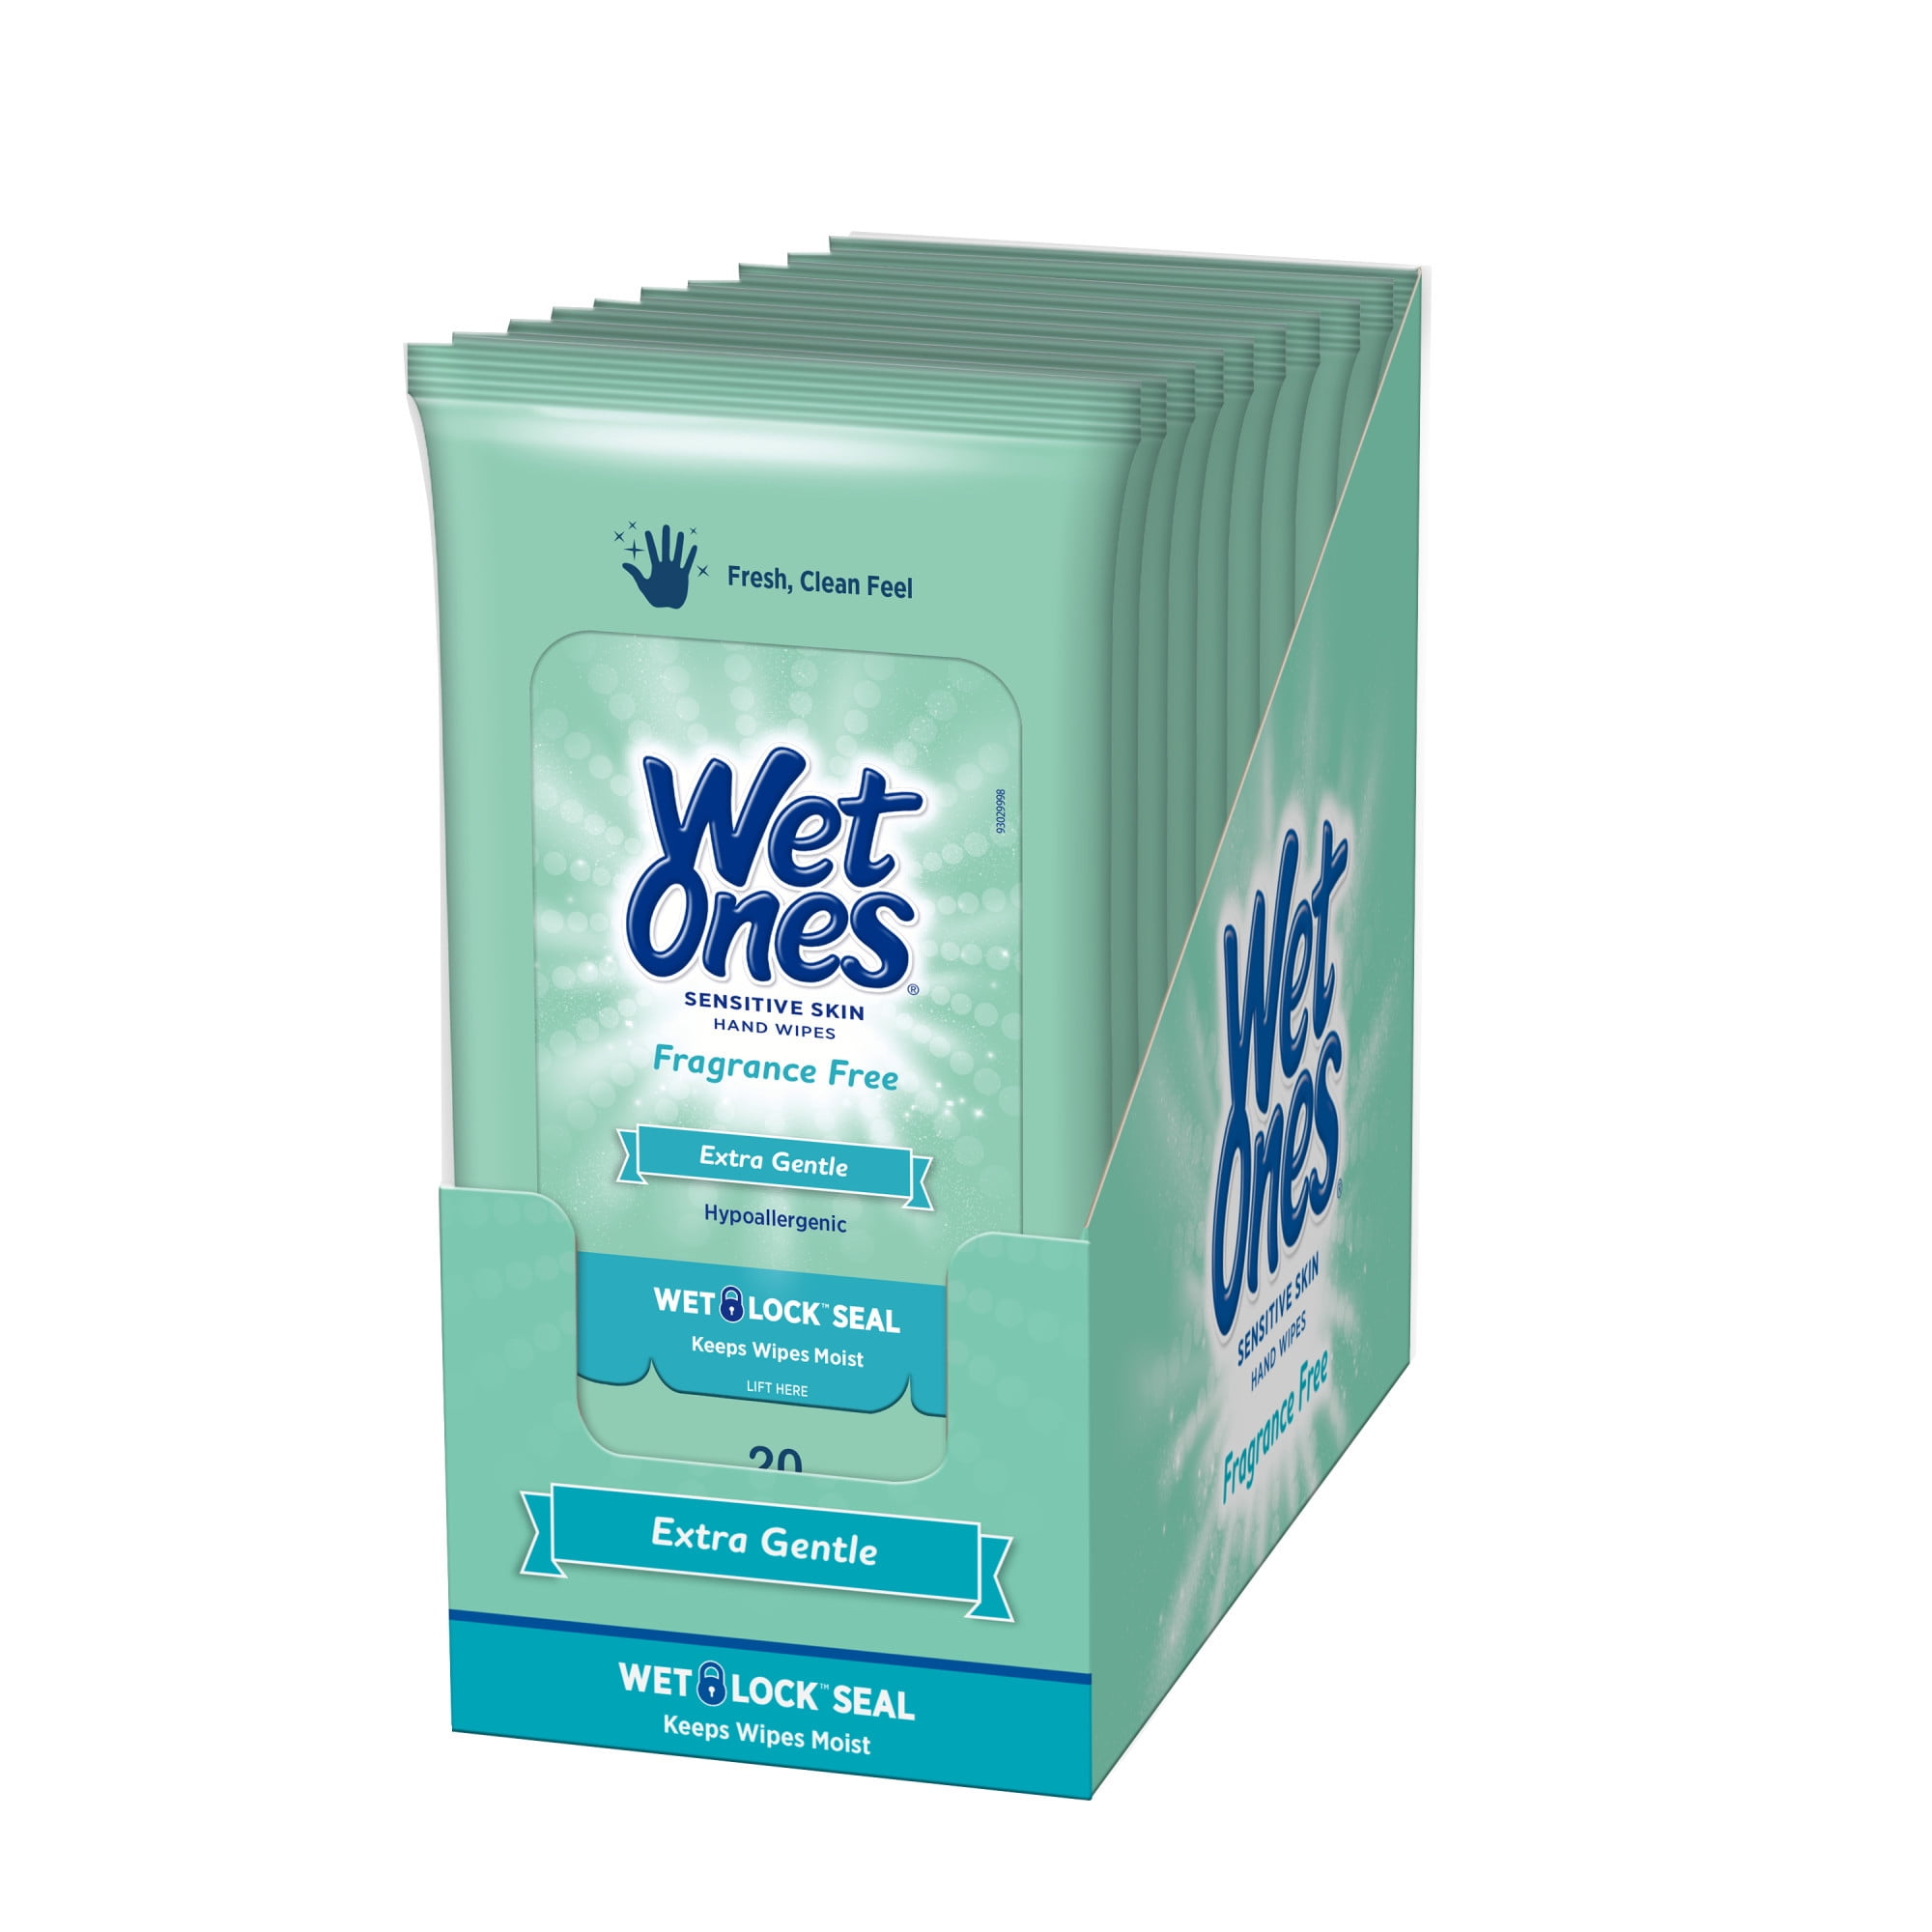 Wet Ones Sensitive Skin Fragrance Free Hand Wipes 20 Ct Travel Pack,  Hypoallergenic, Extra Gentle, Hand & Face Wipes 